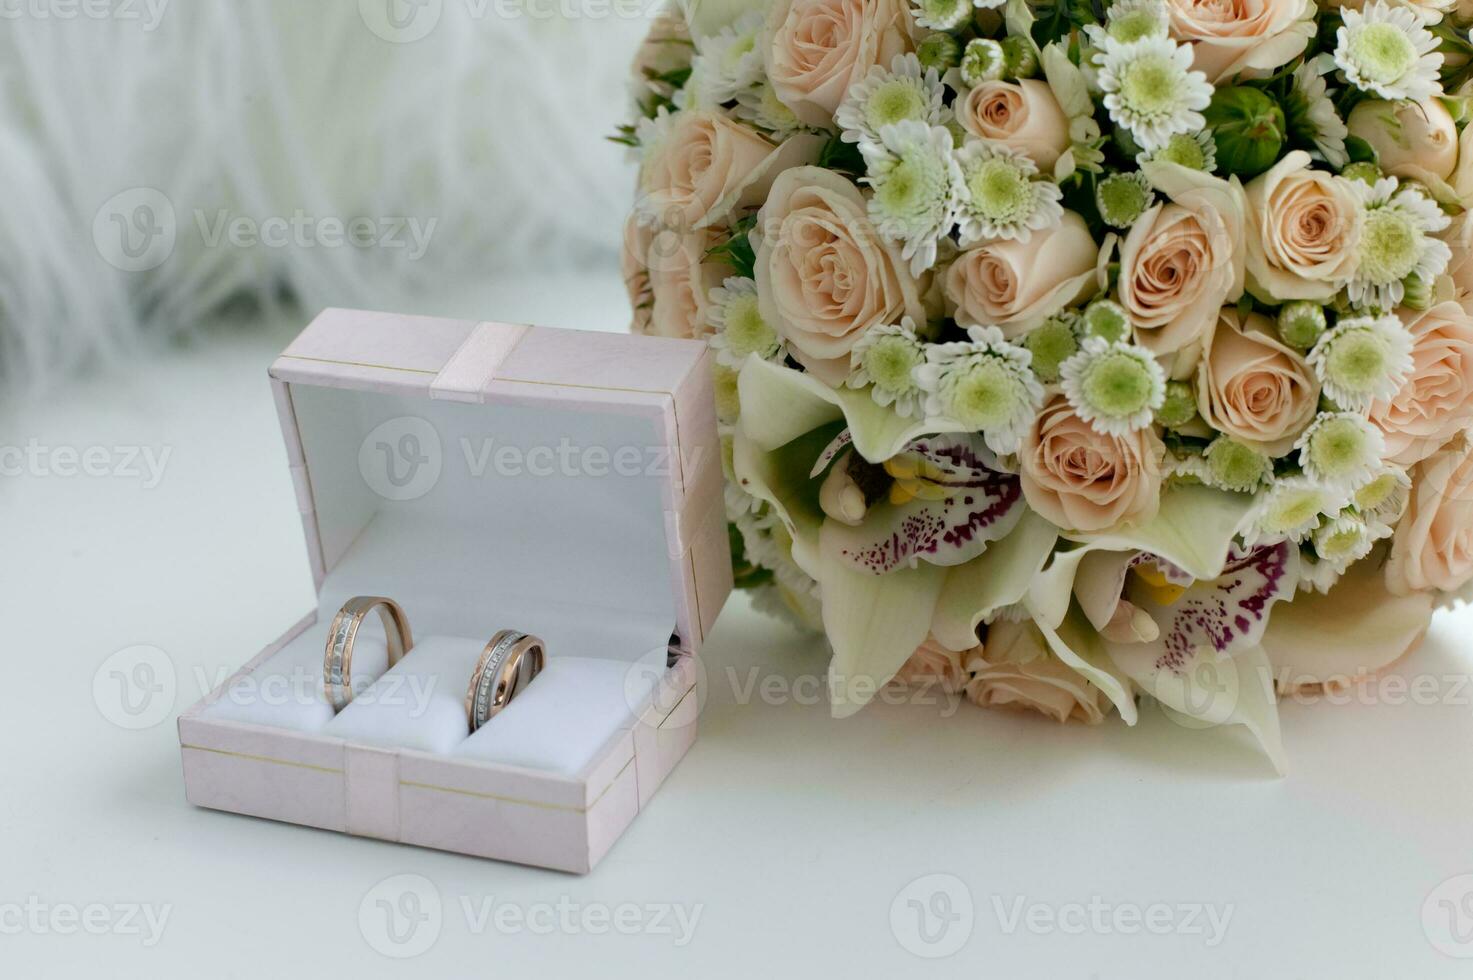 Wedding bride and groom rings in a box on the table photo